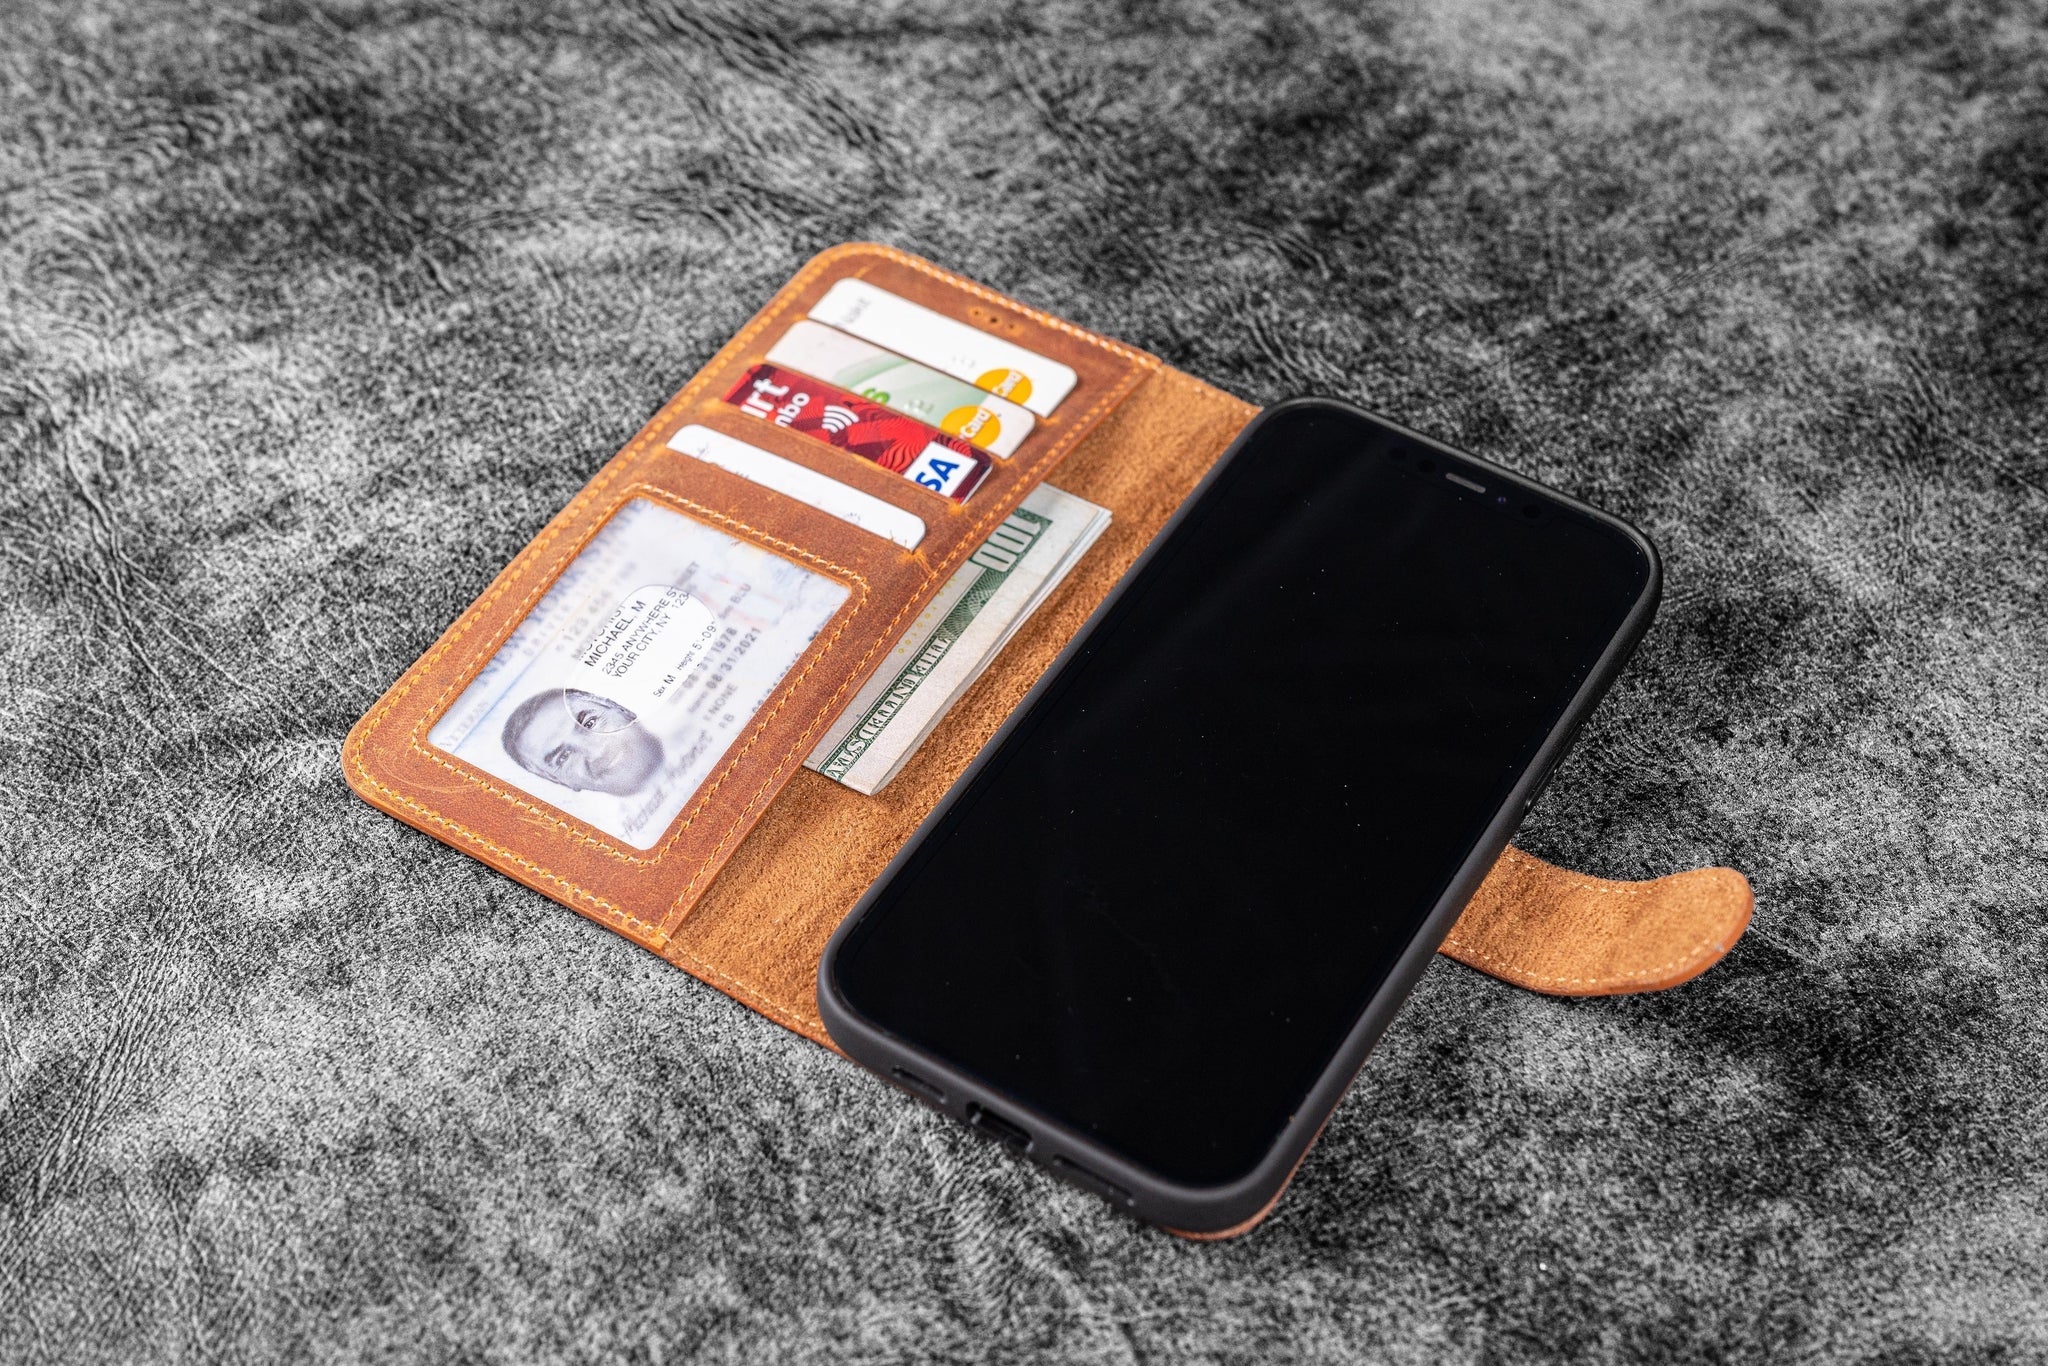 Galen Leather iPhone 13 Pro Max (6.7) Leather Wallet Case